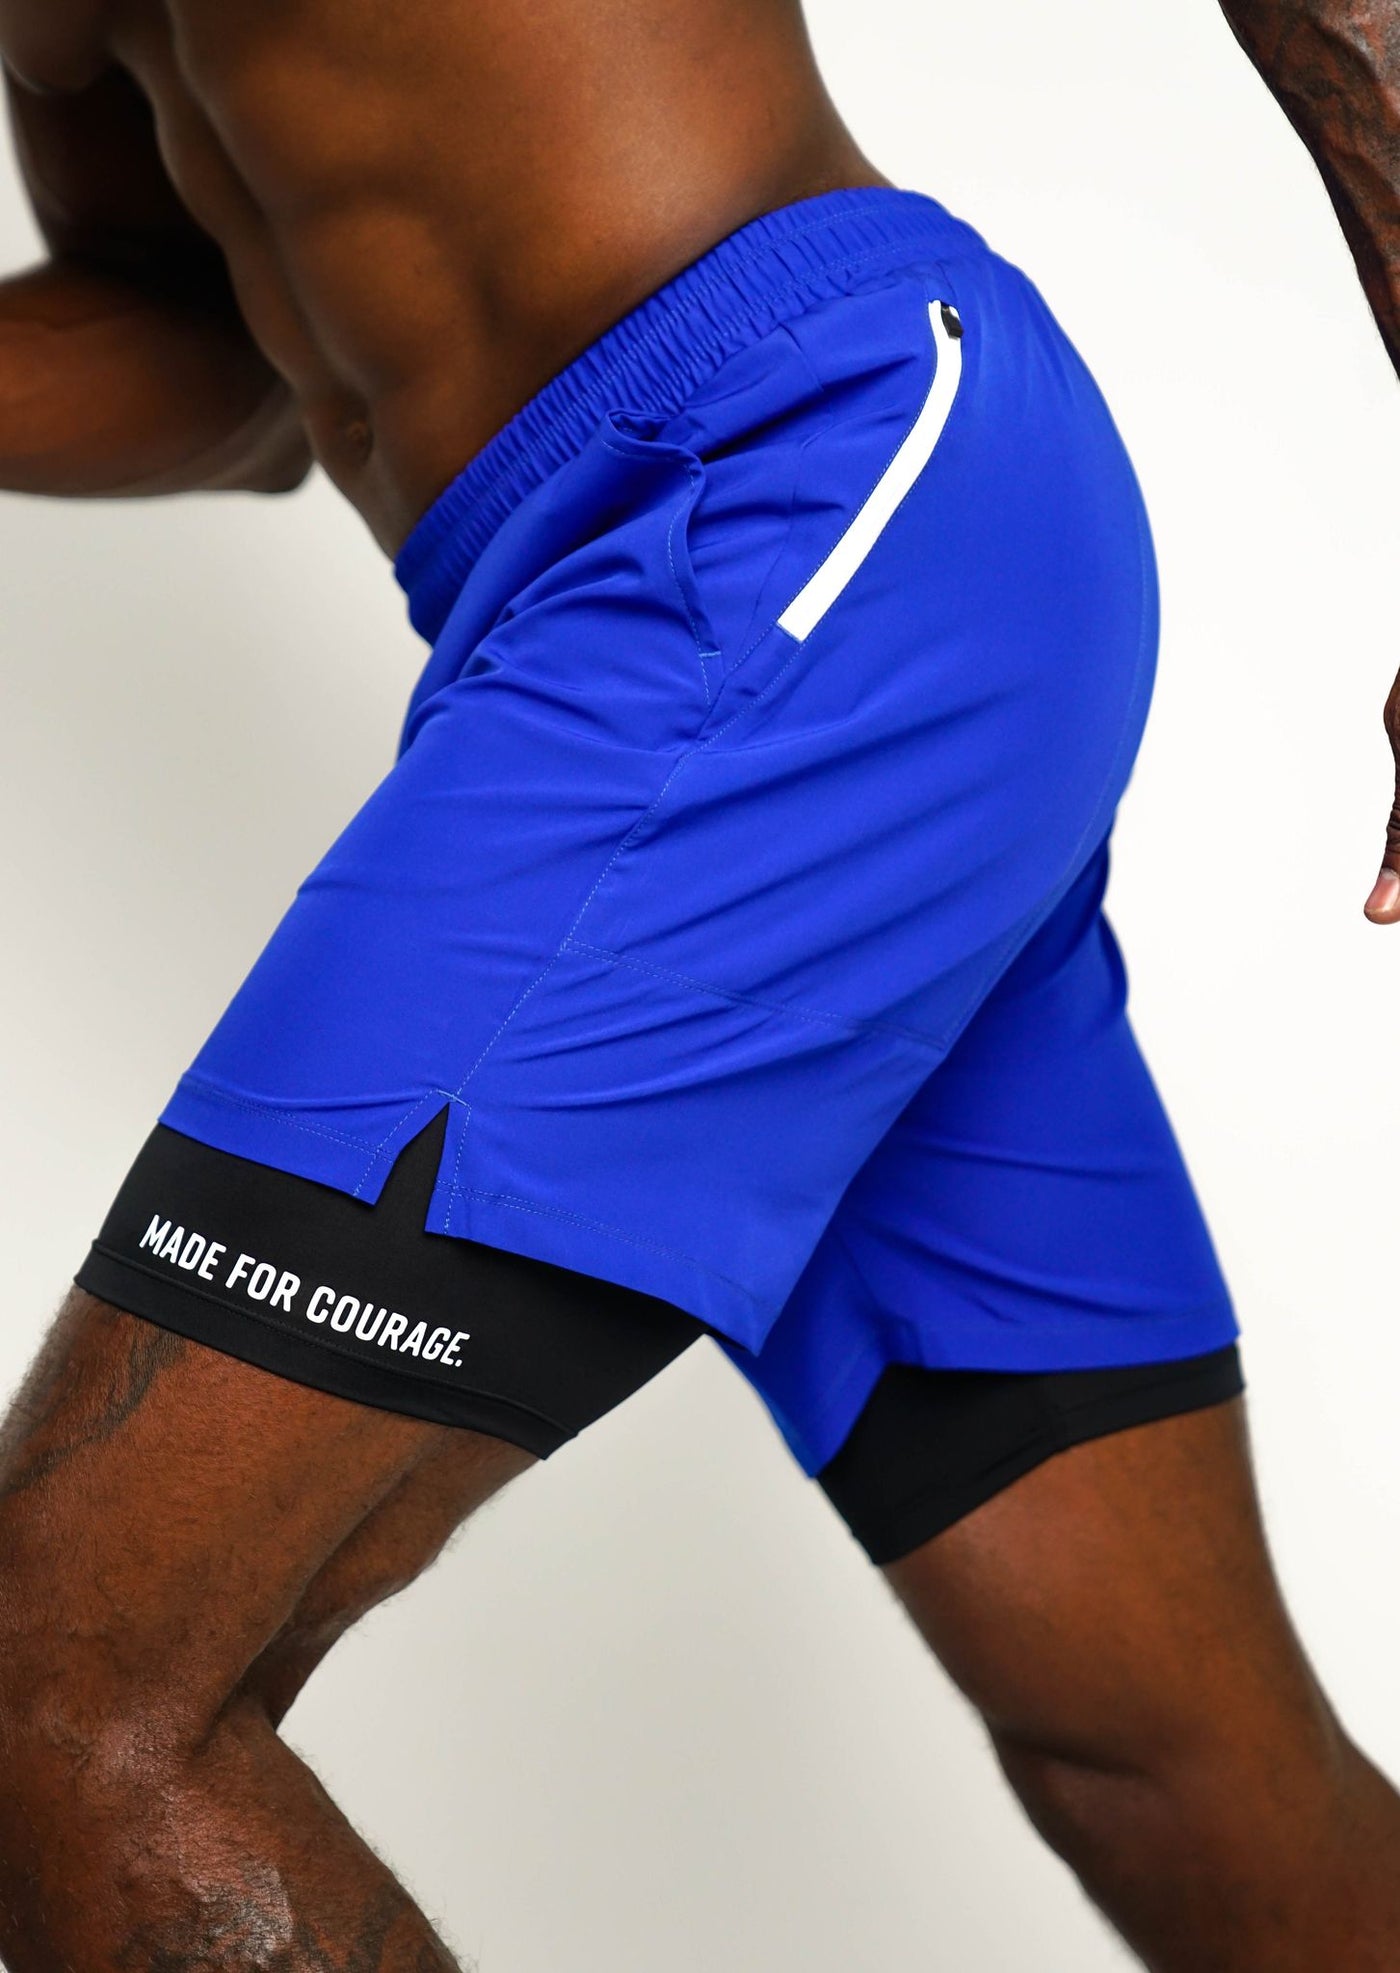 Men's Shorts with Liner - Blue with Black Liner